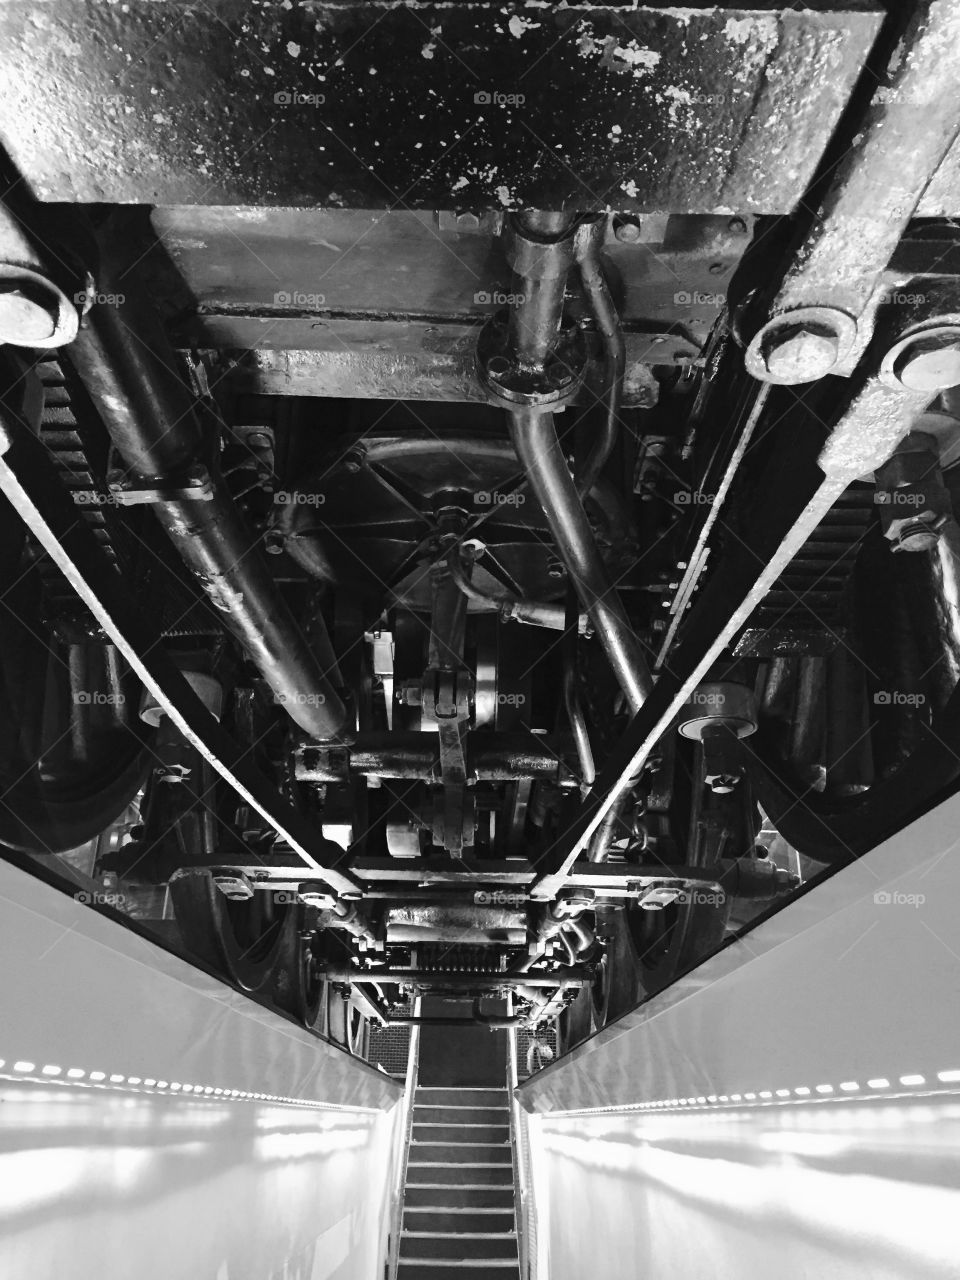 Train undercarriage . View of the underneath of a steam train